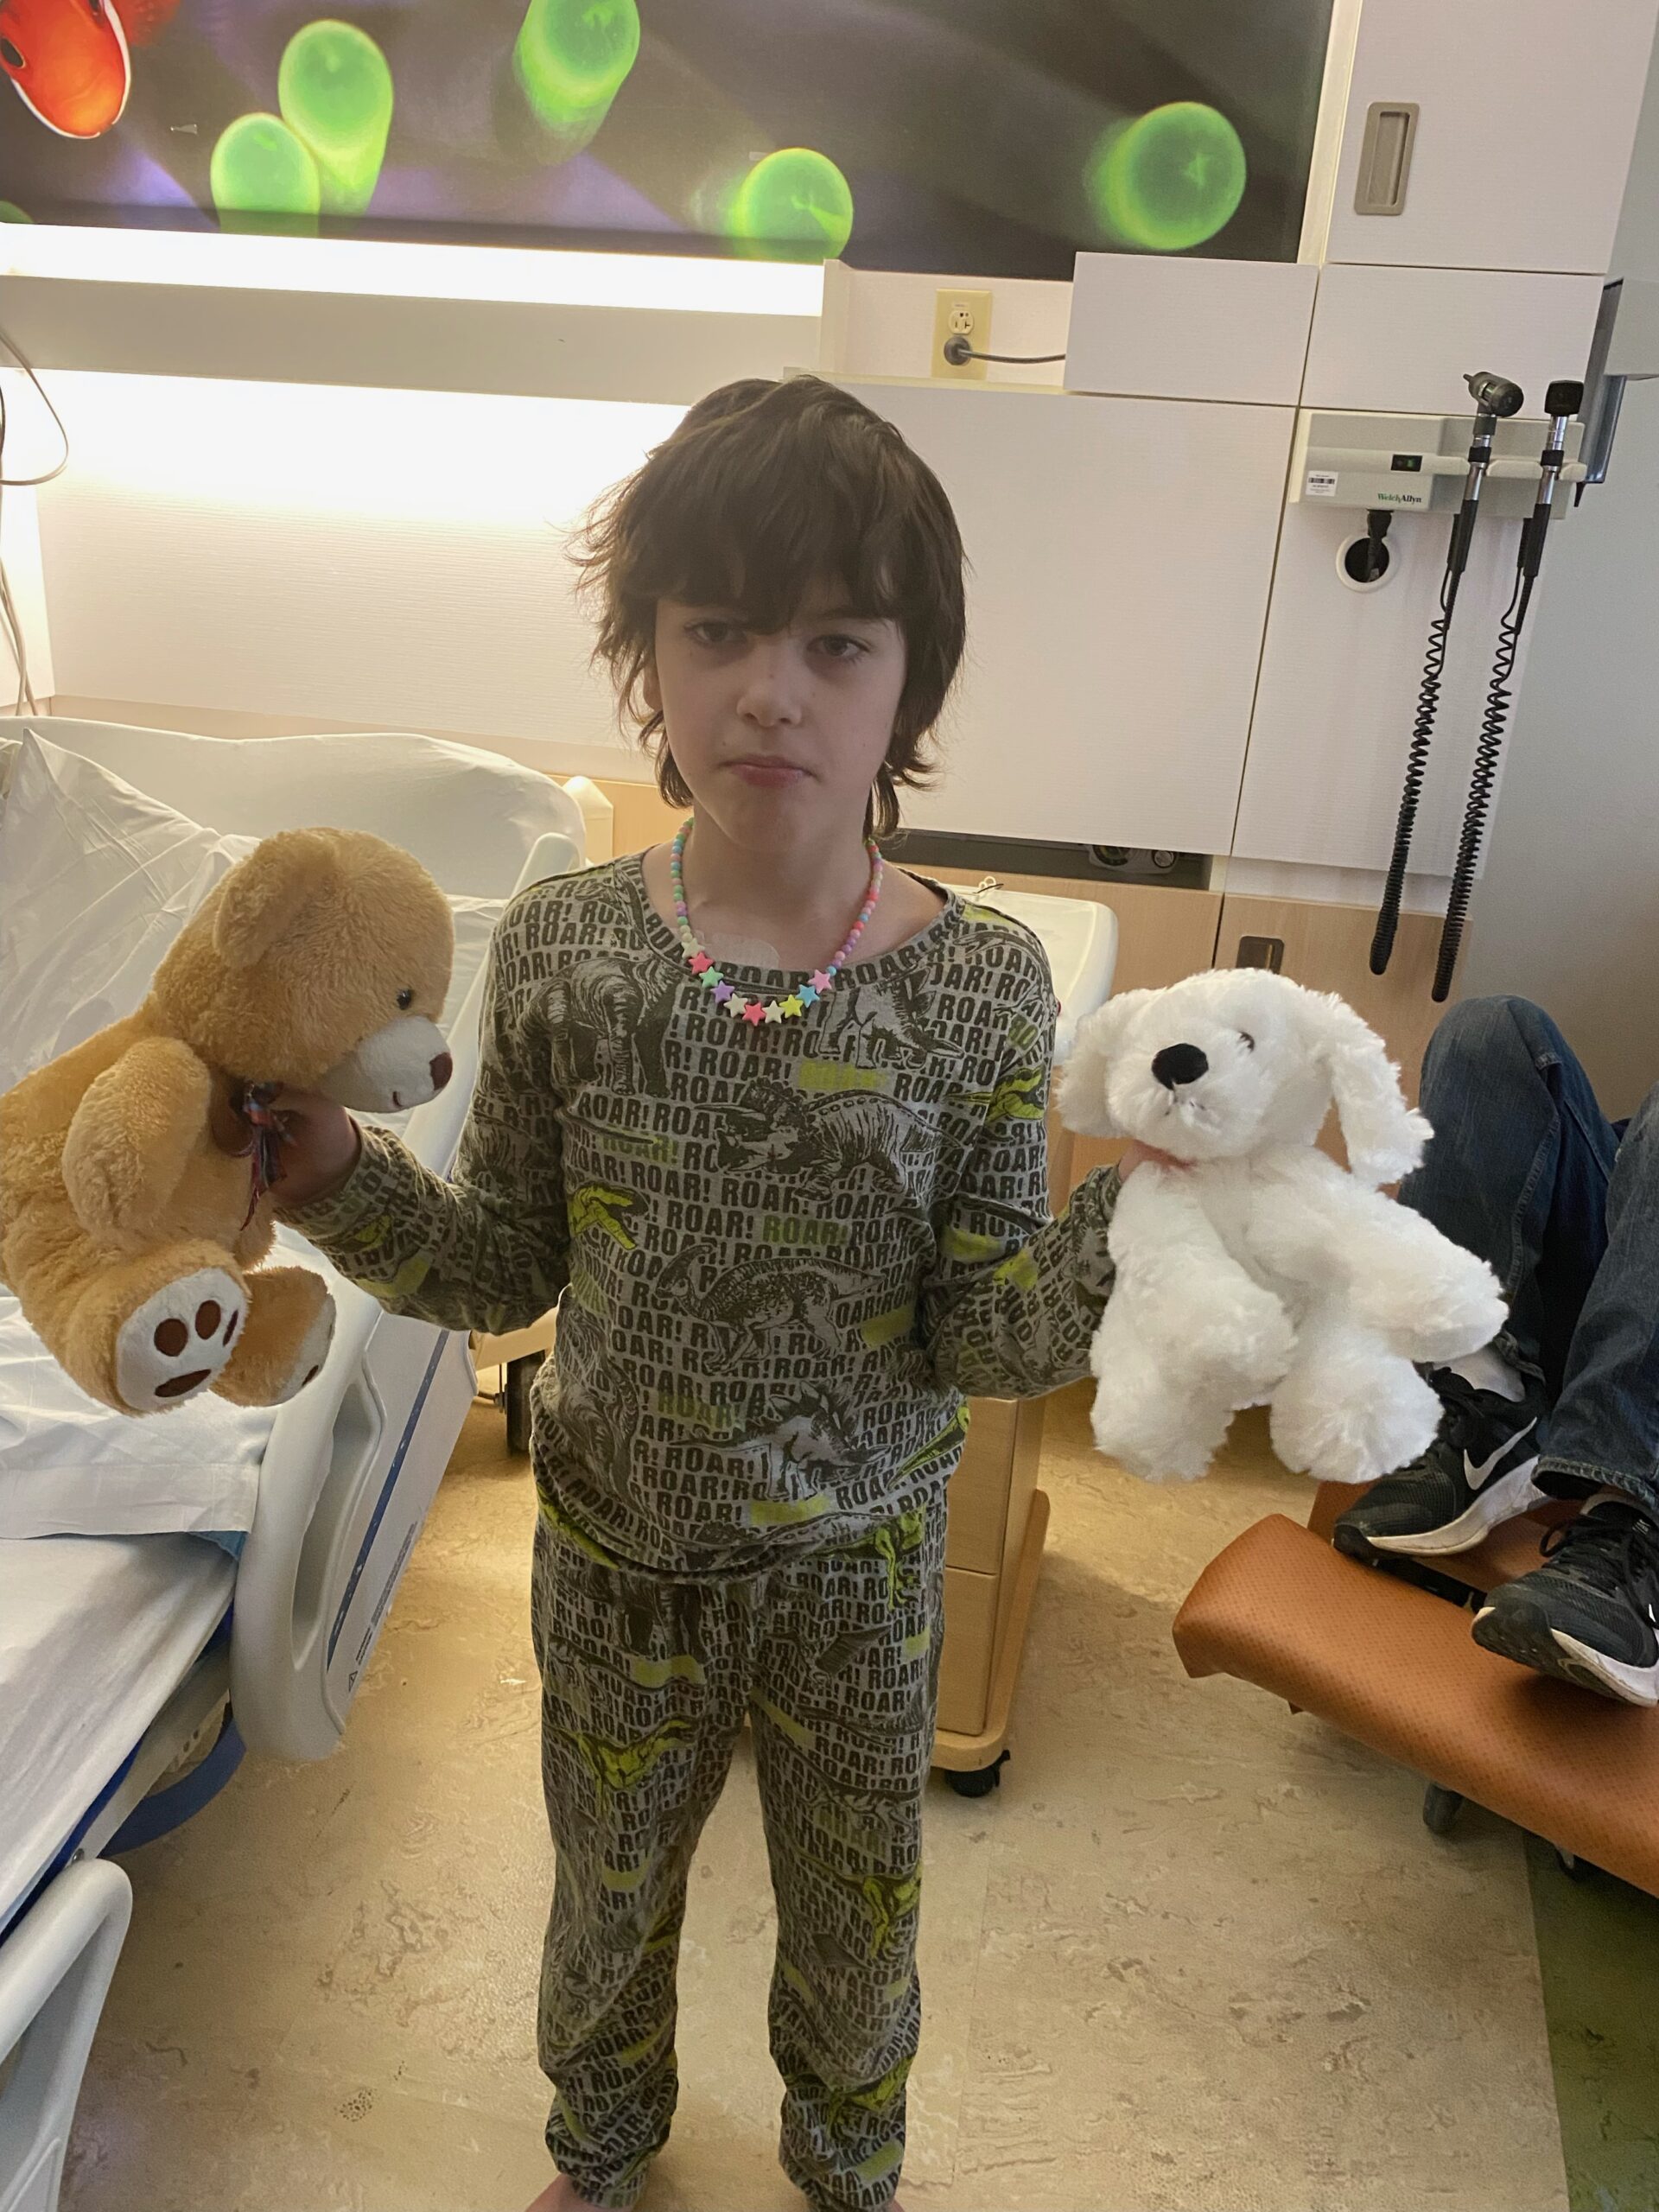 A child hospital patient holding 2 stuffed animals, 1 in each hand 